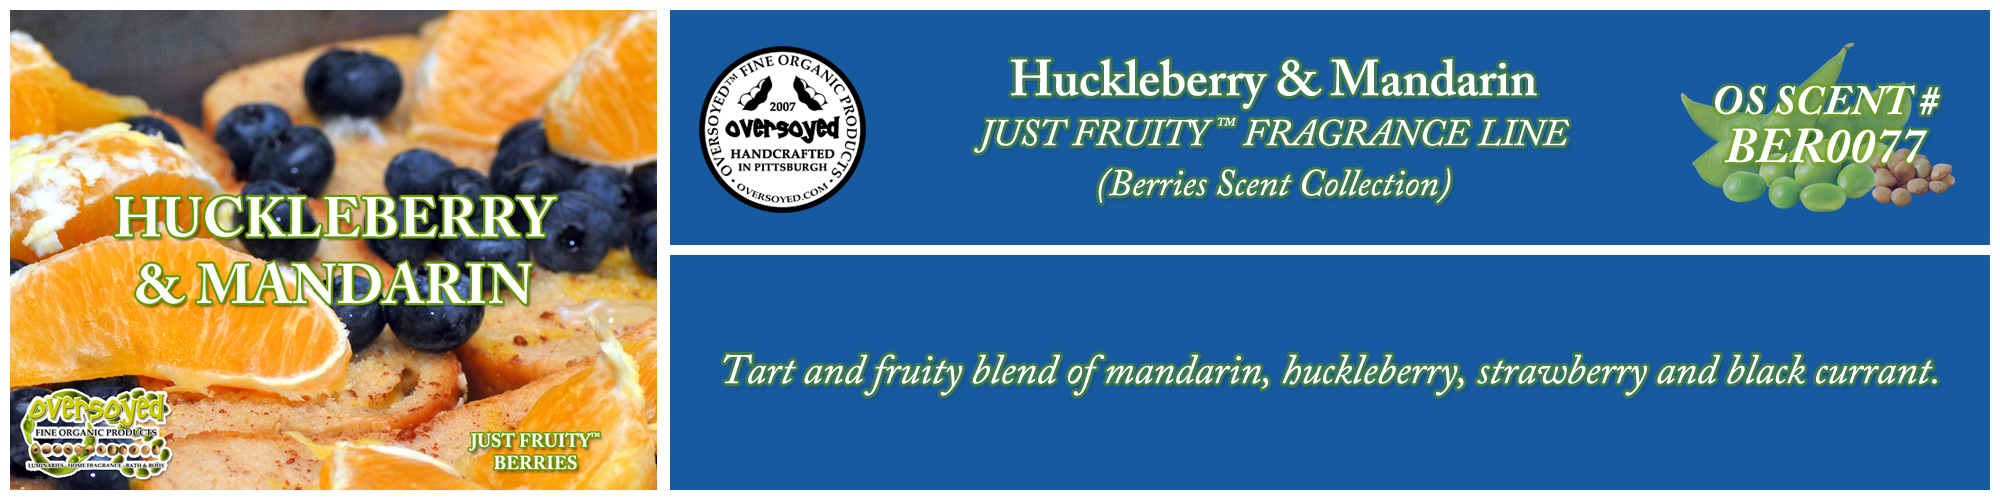 Huckleberry & Mandarin Handcrafted Products Collection